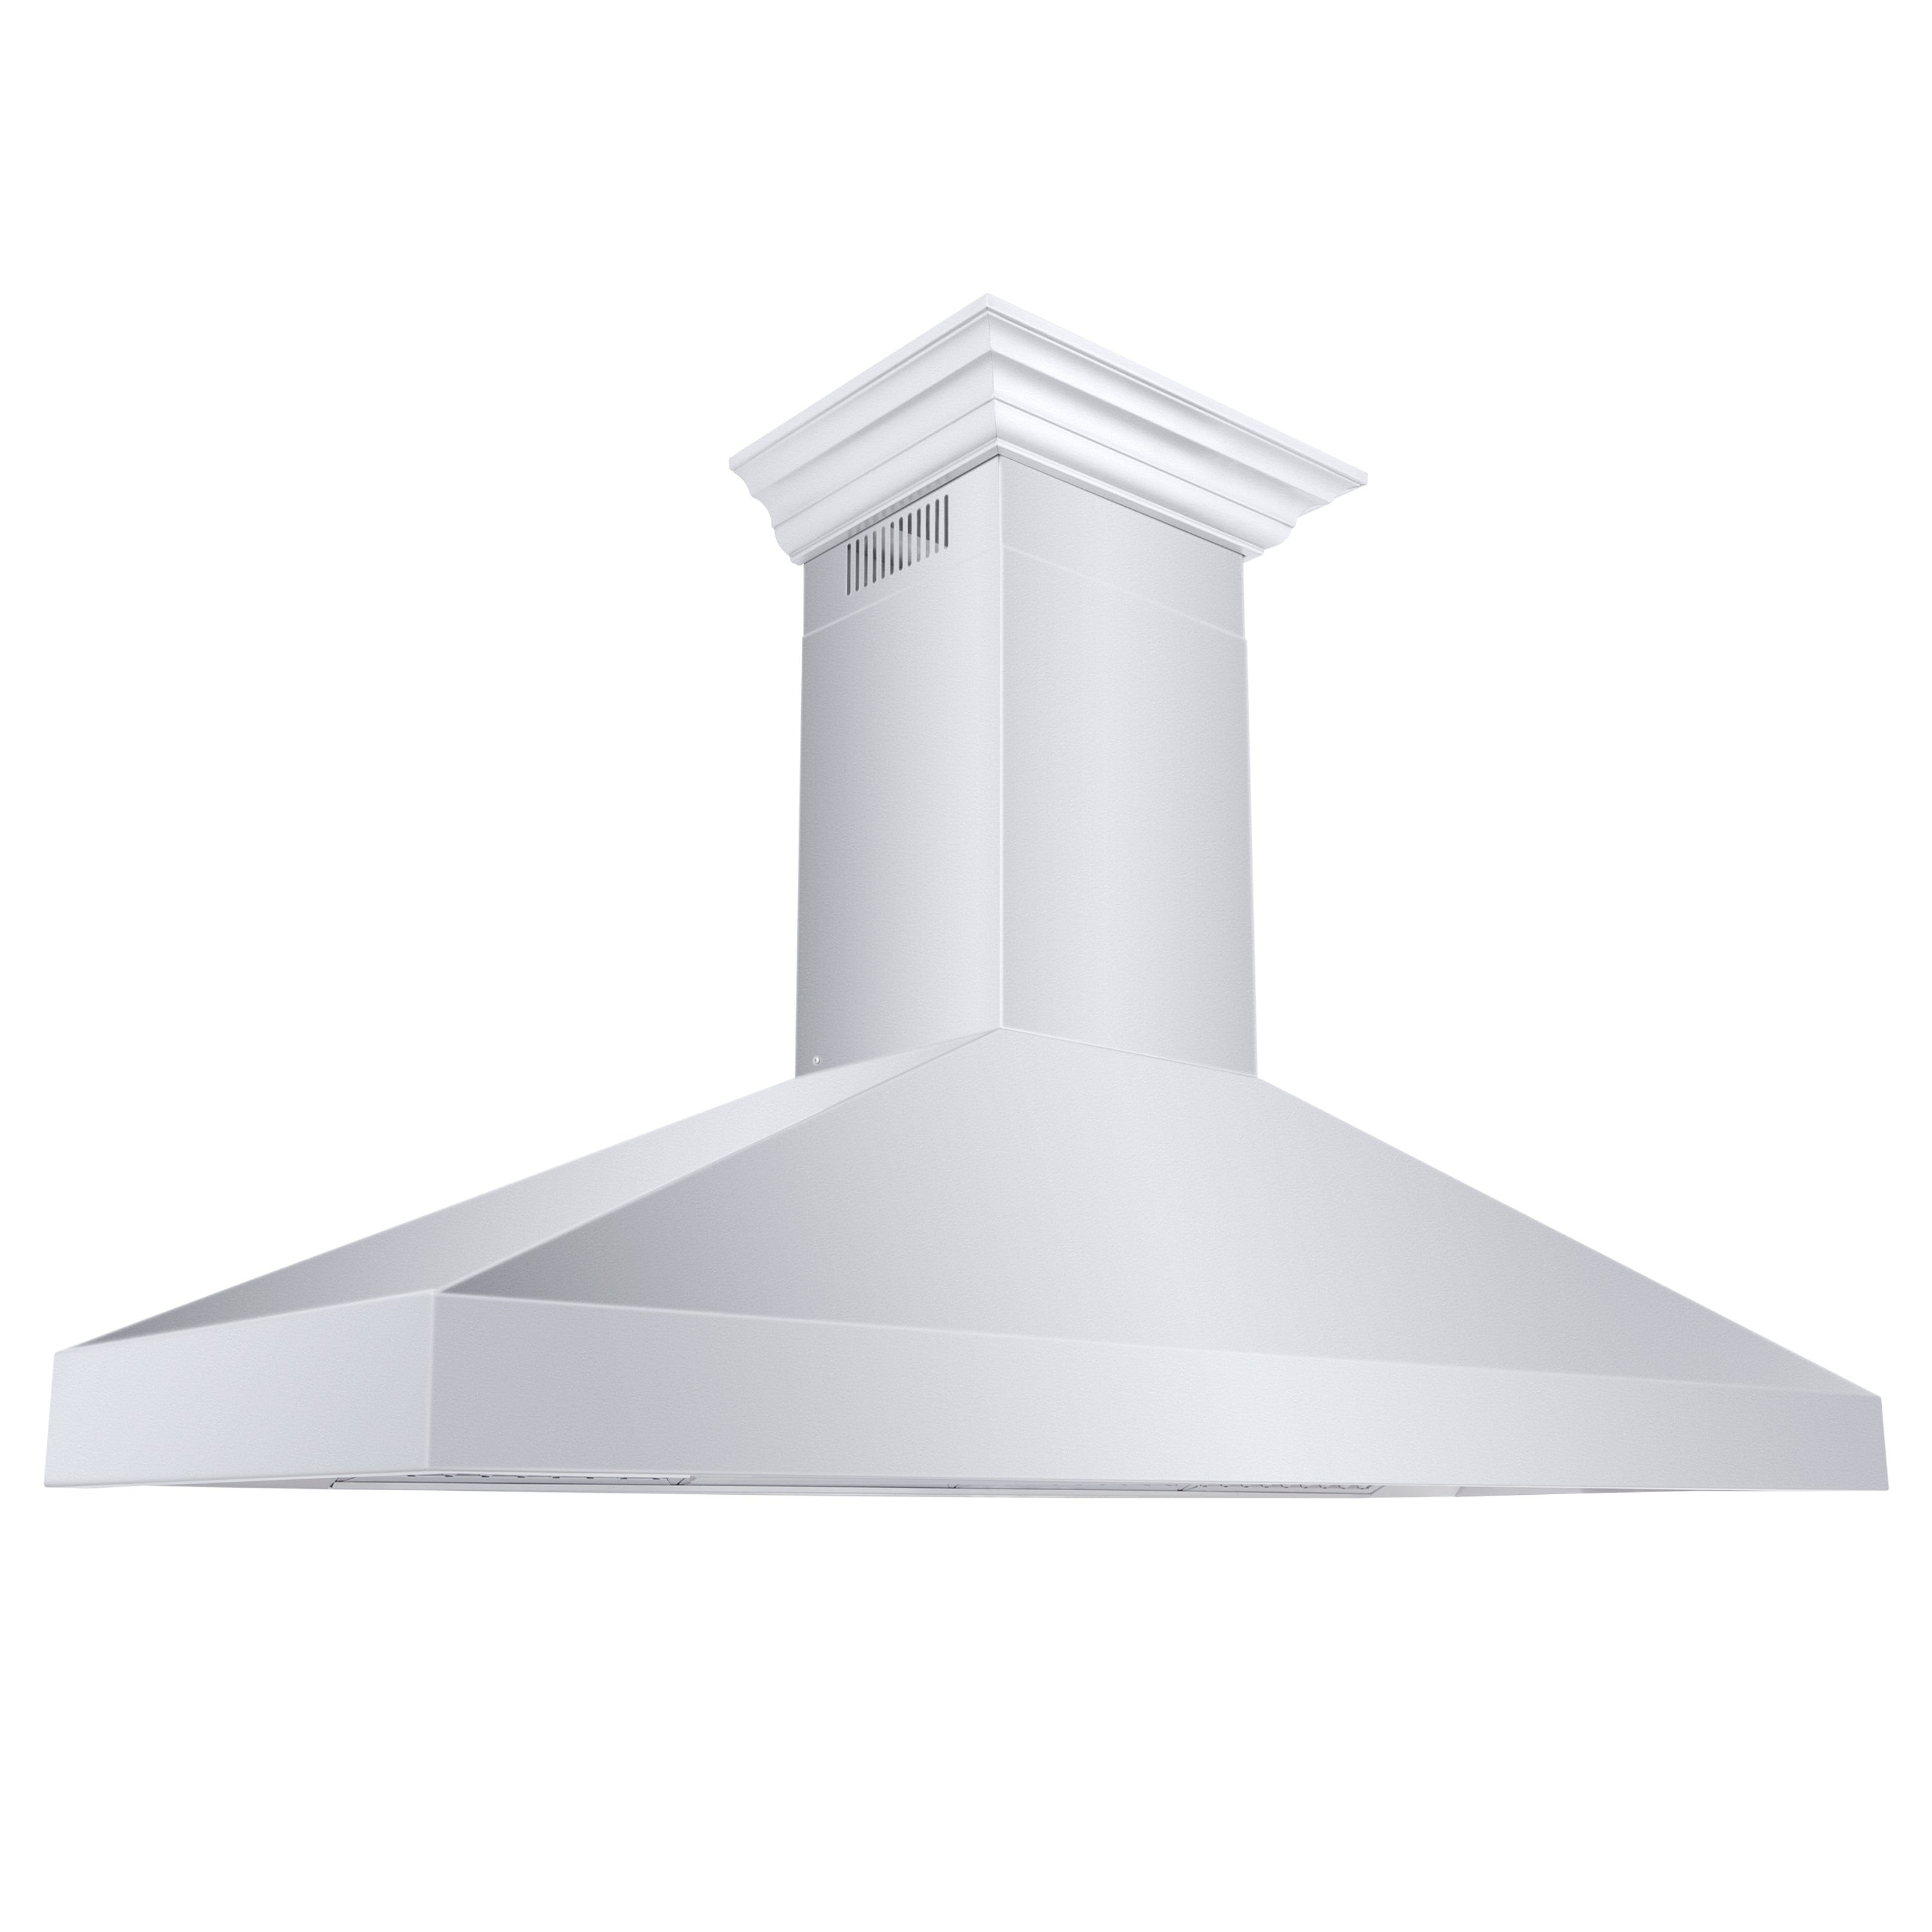 ZLINE 42" Professional Convertible Vent Wall Mount Range Hood in Stainless Steel with Crown Molding (597CRN-42)